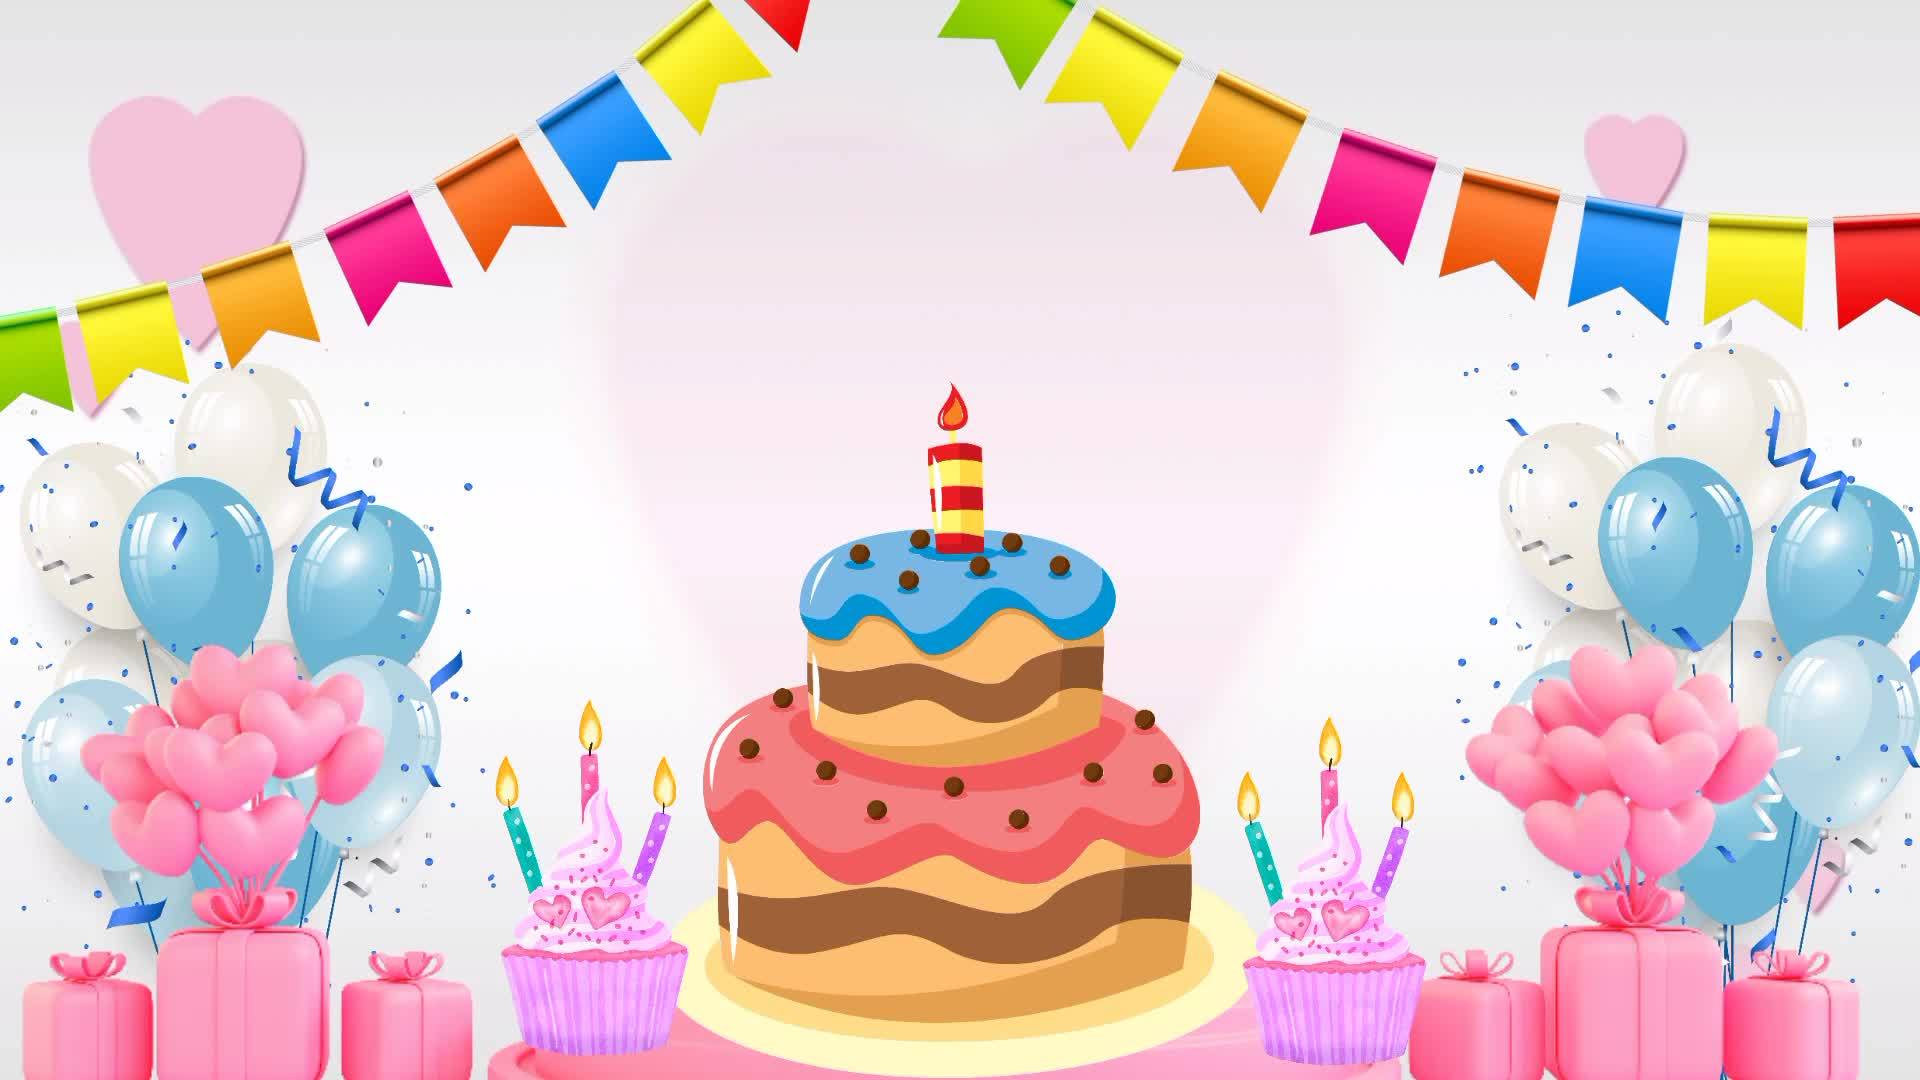 Happy Birthday Greetings Stock Video Footage for Free Download